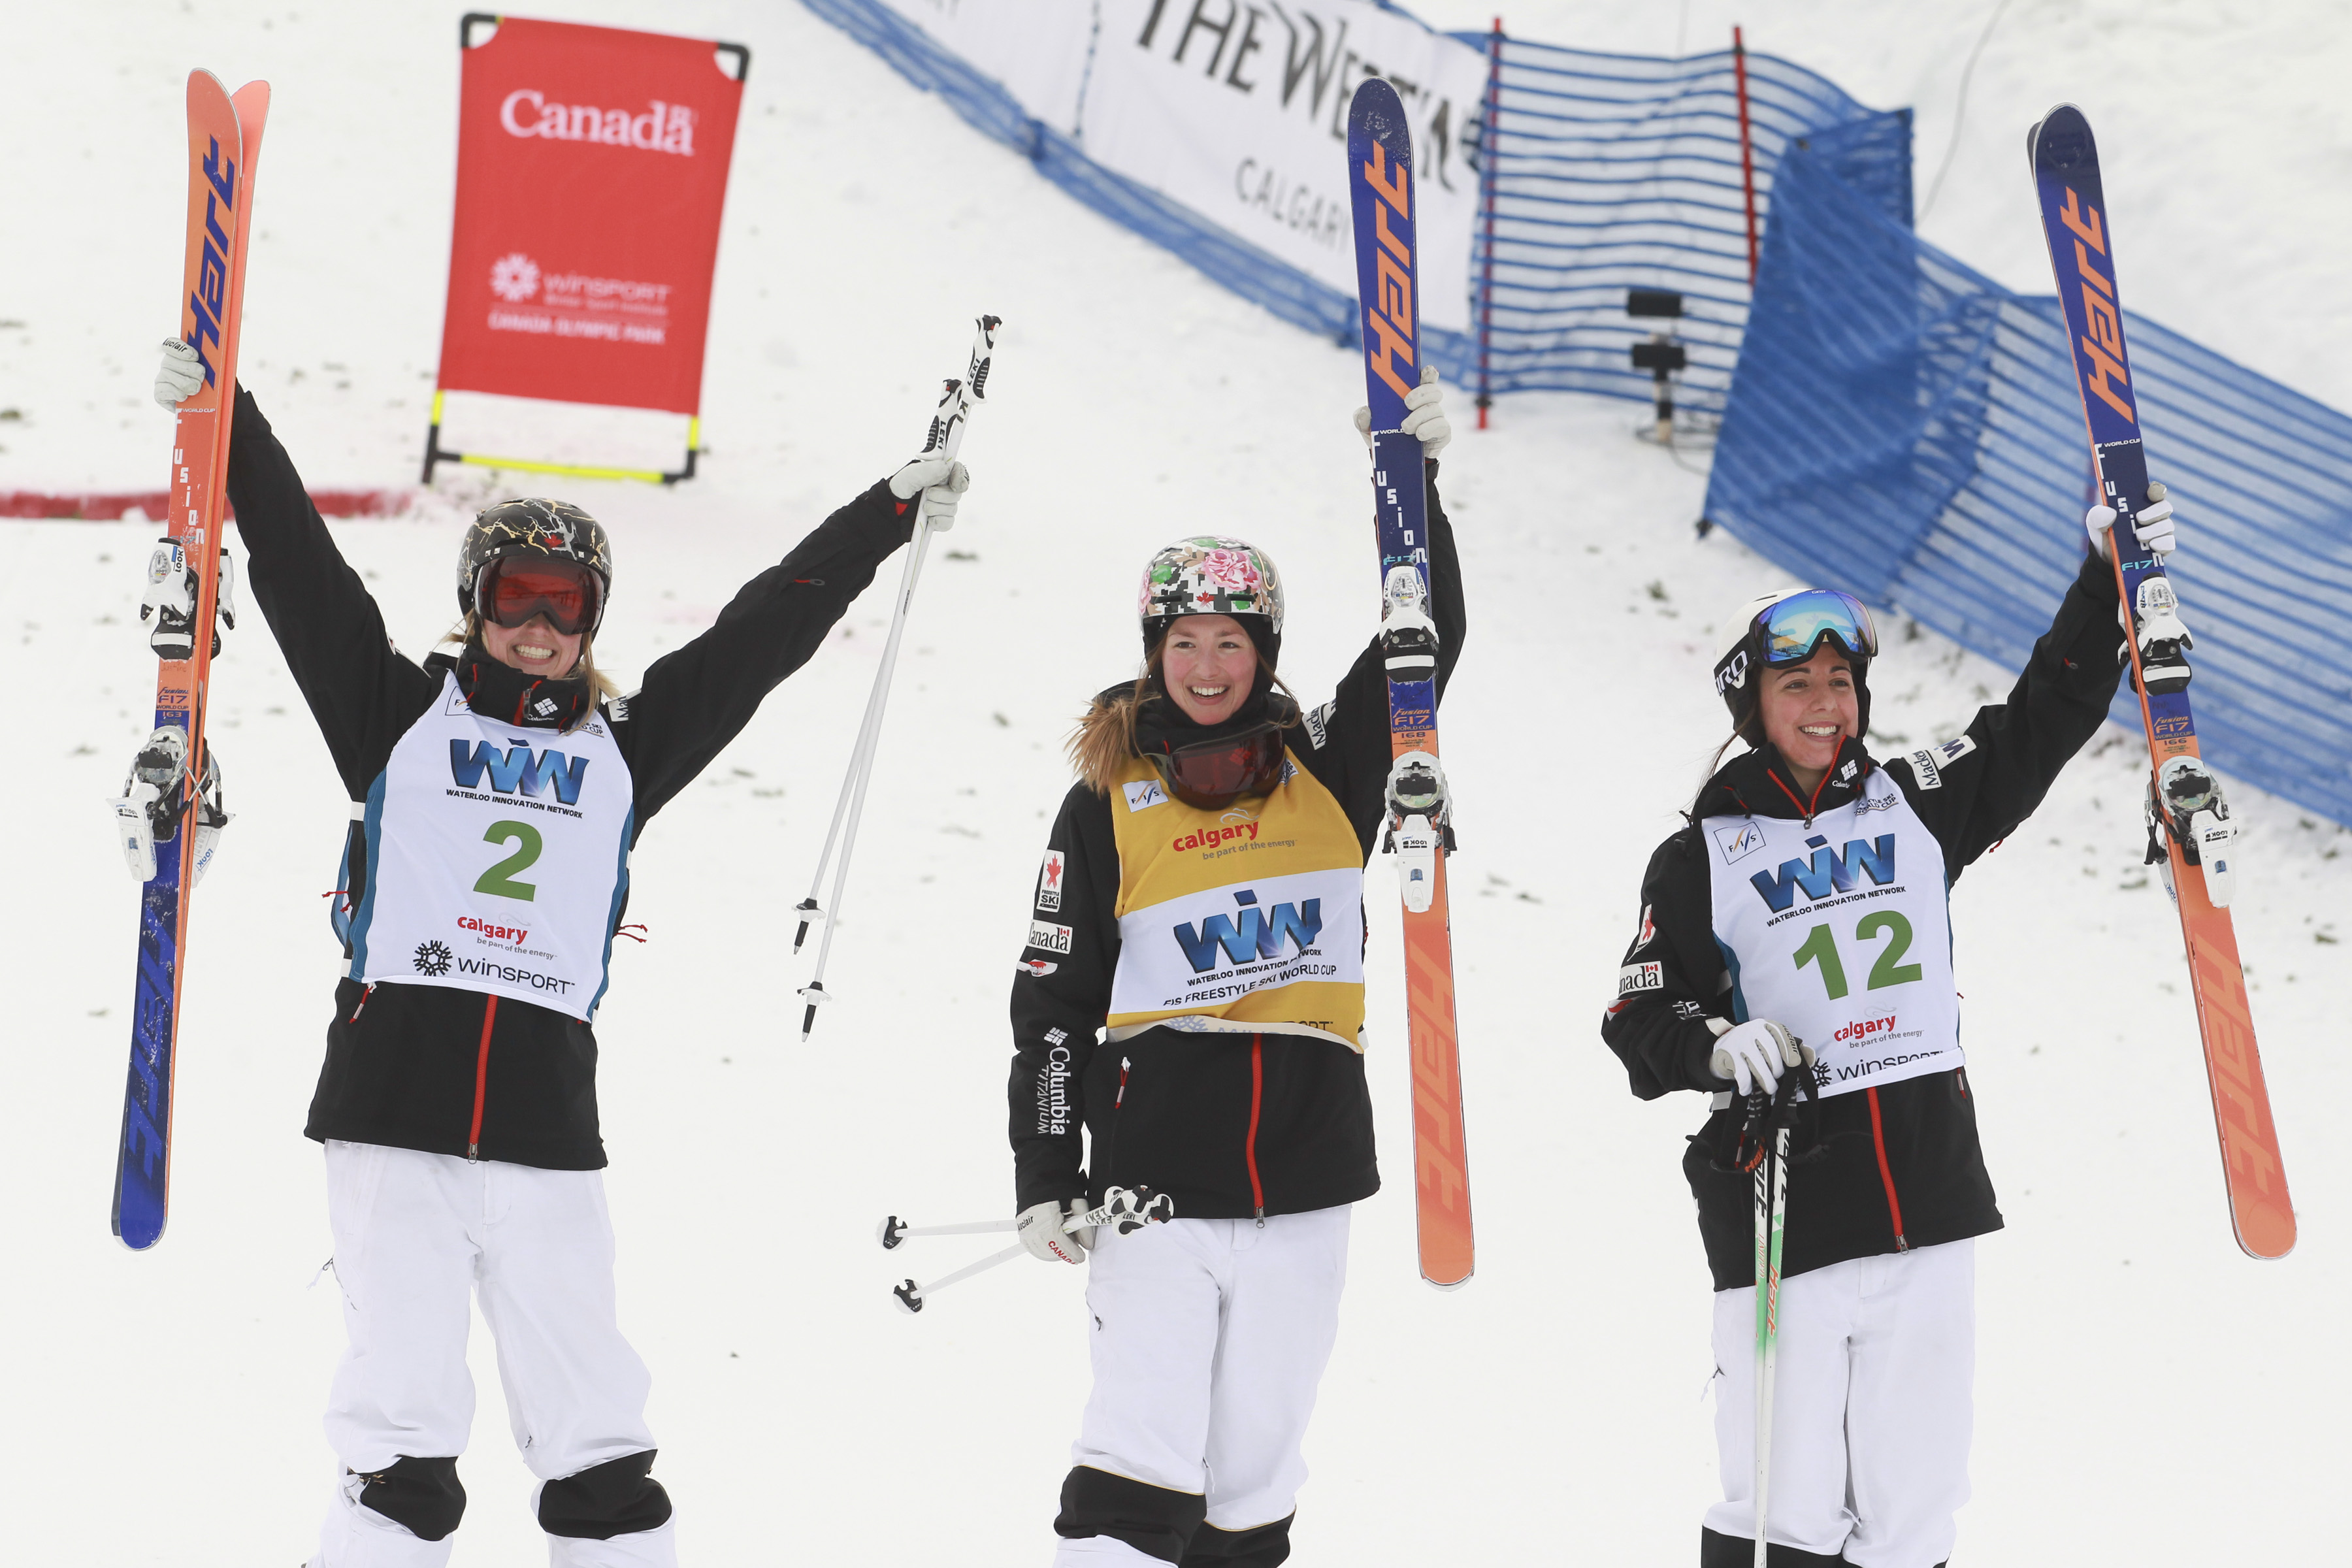 The top three in women's moguls at the FIS freestyle ski World Cup in Calgary, January 30, 2016. From left, Justine Dufour-Lapointe (second), Chloe Dufour-Lapointe (first) and Andi Naude. (Photo: Mike Ridewood/CFSA)